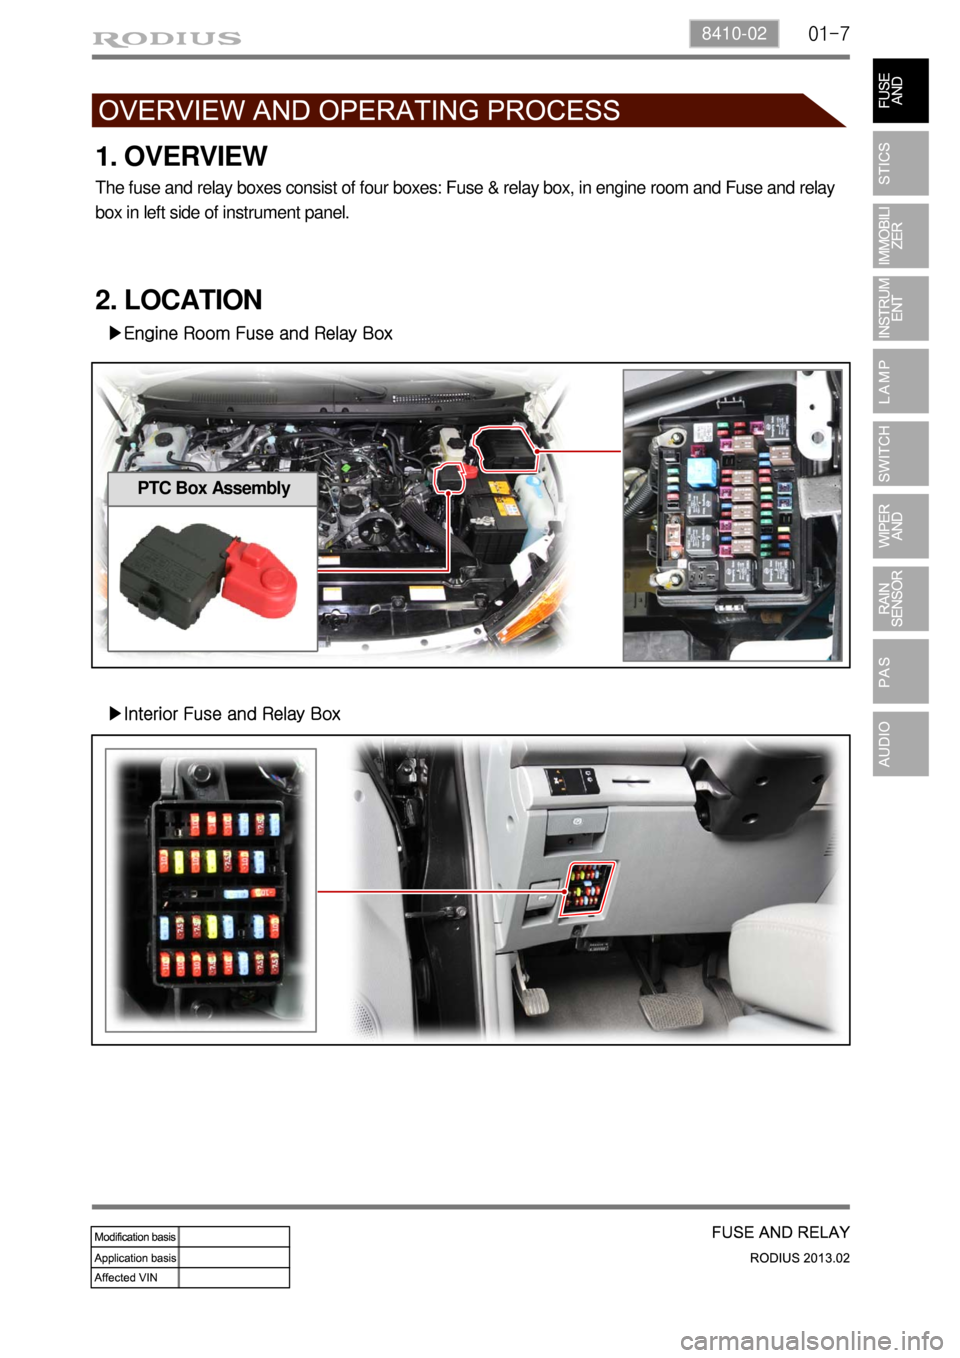 SSANGYONG TURISMO 2013  Service Manual 01-78410-02
1. OVERVIEW
The fuse and relay boxes consist of four boxes: Fuse & relay box, in engine room and Fuse and relay 
box in left side of instrument panel.
2. LOCATION
▶Engine Room Fuse and R